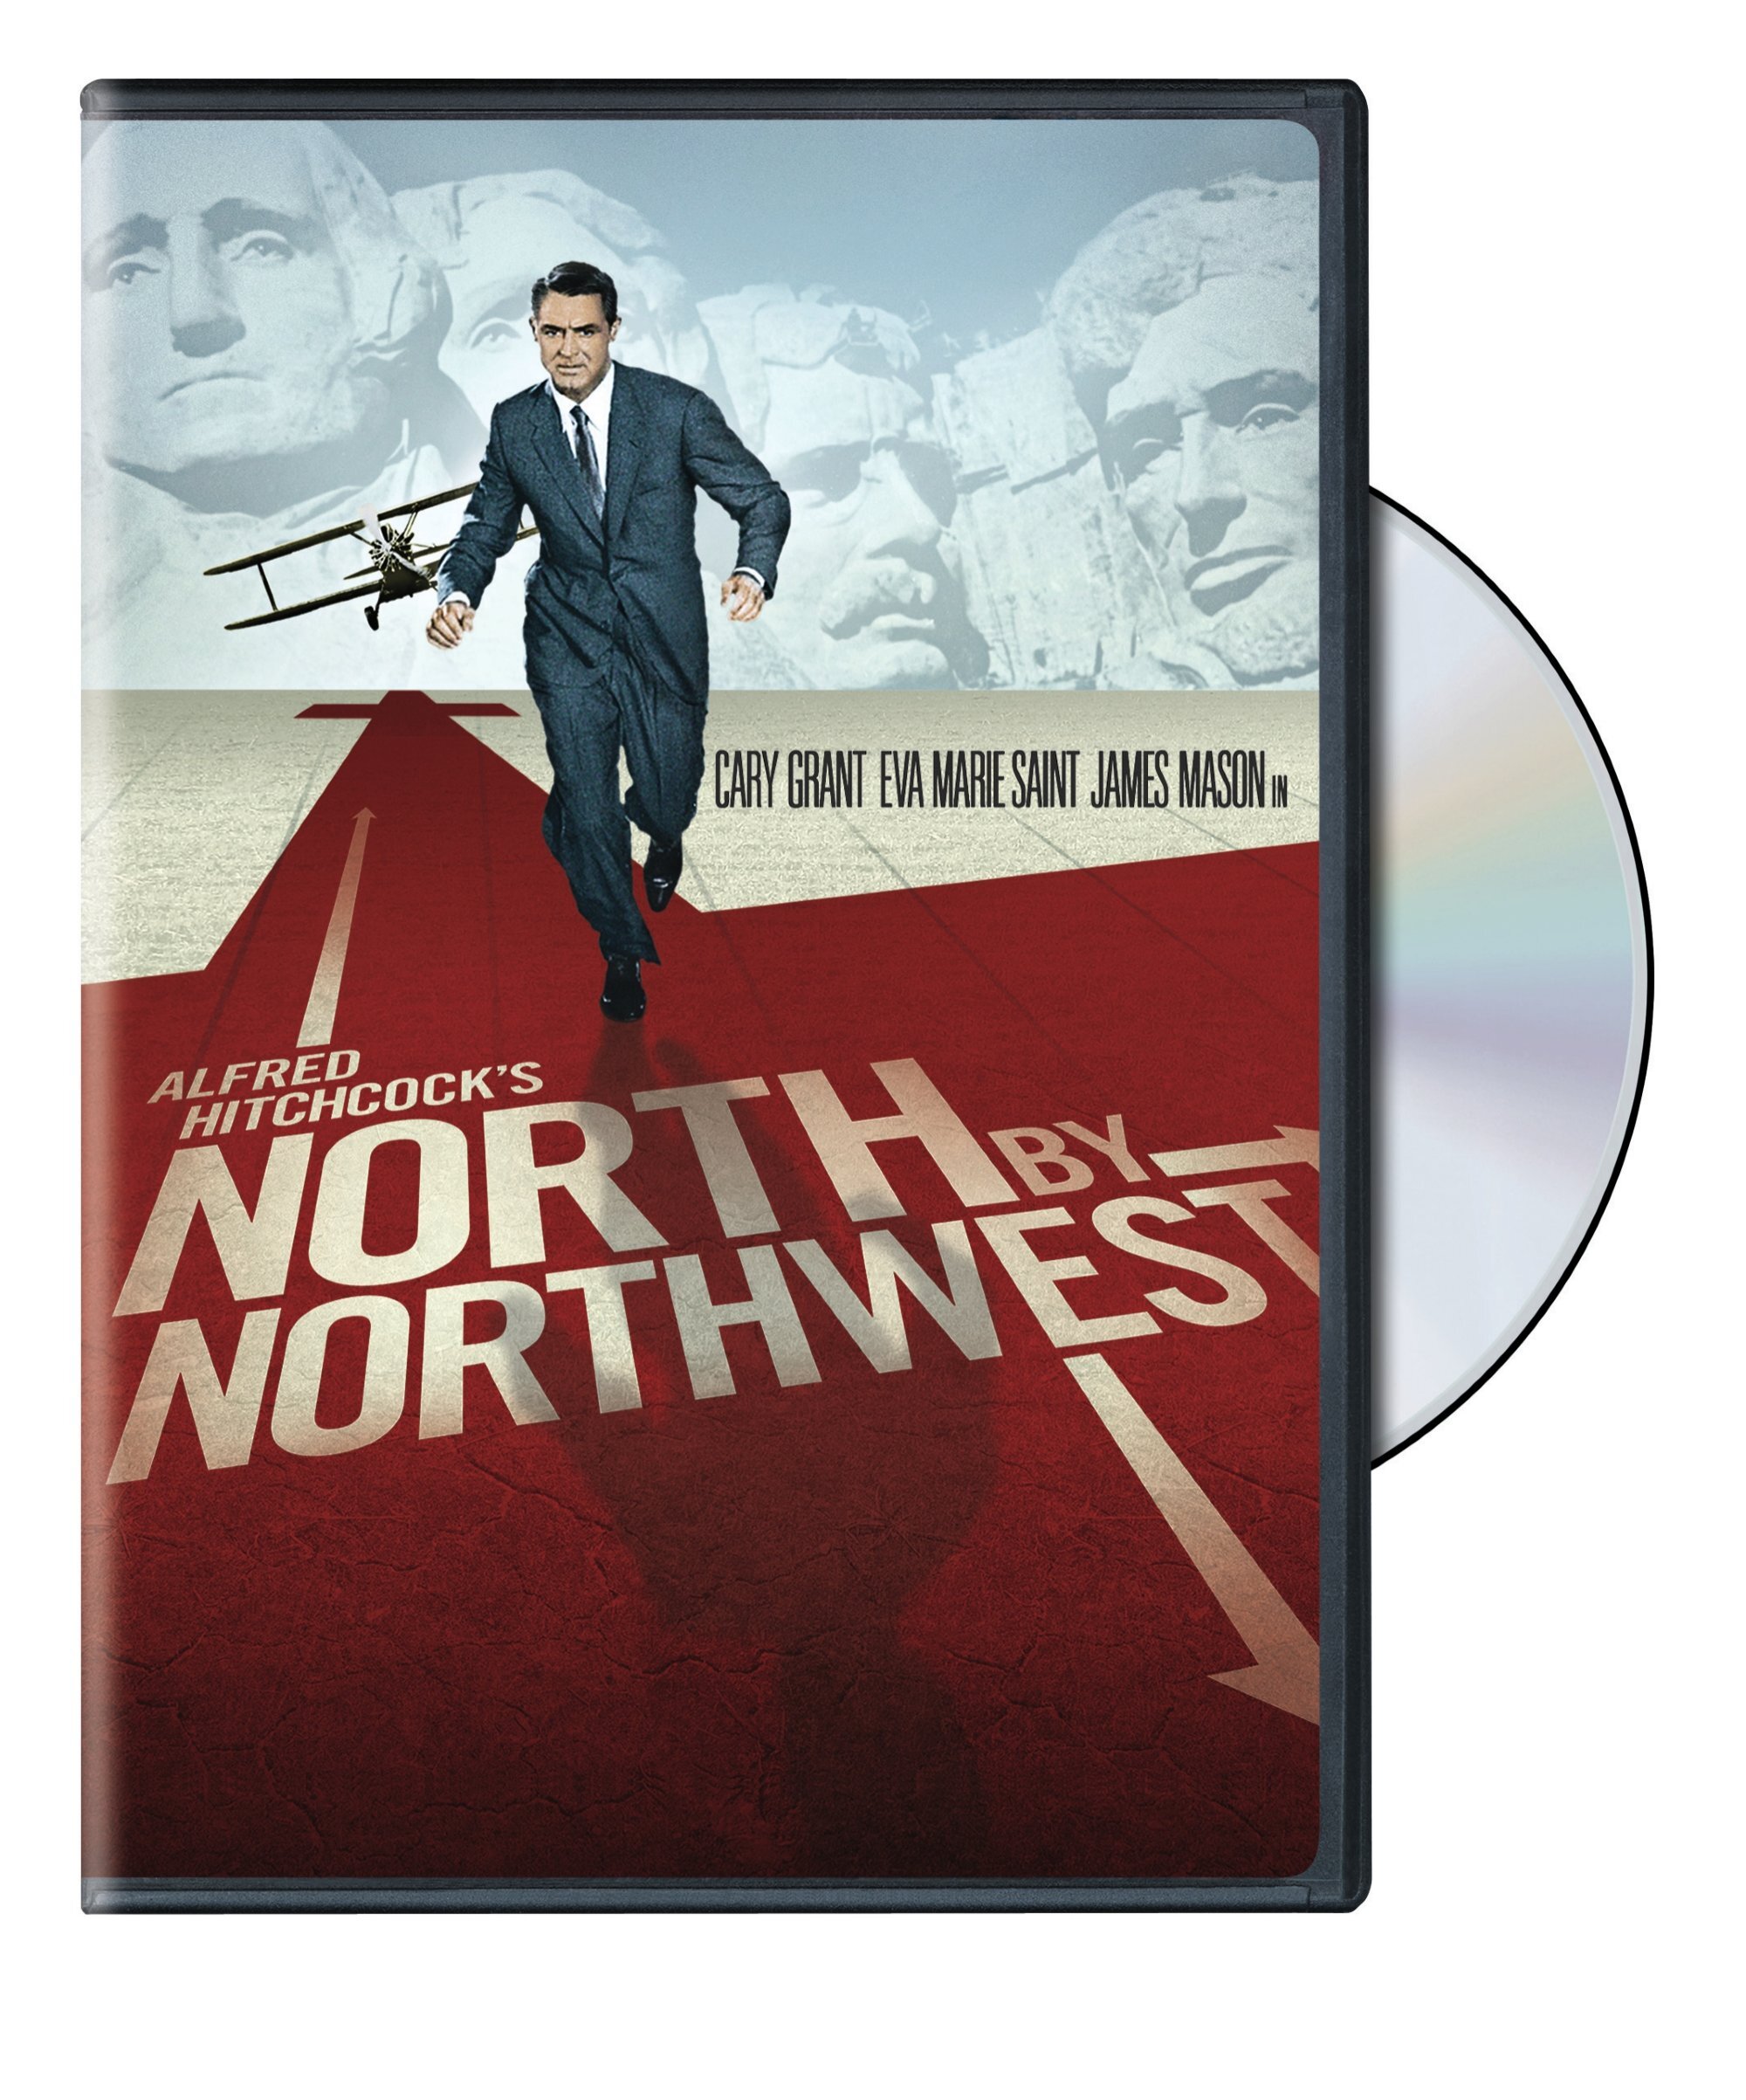 North By Northwest (DVD New Packaging) - DVD [ 1959 ]  - Modern Classic Movies On DVD - Movies On GRUV